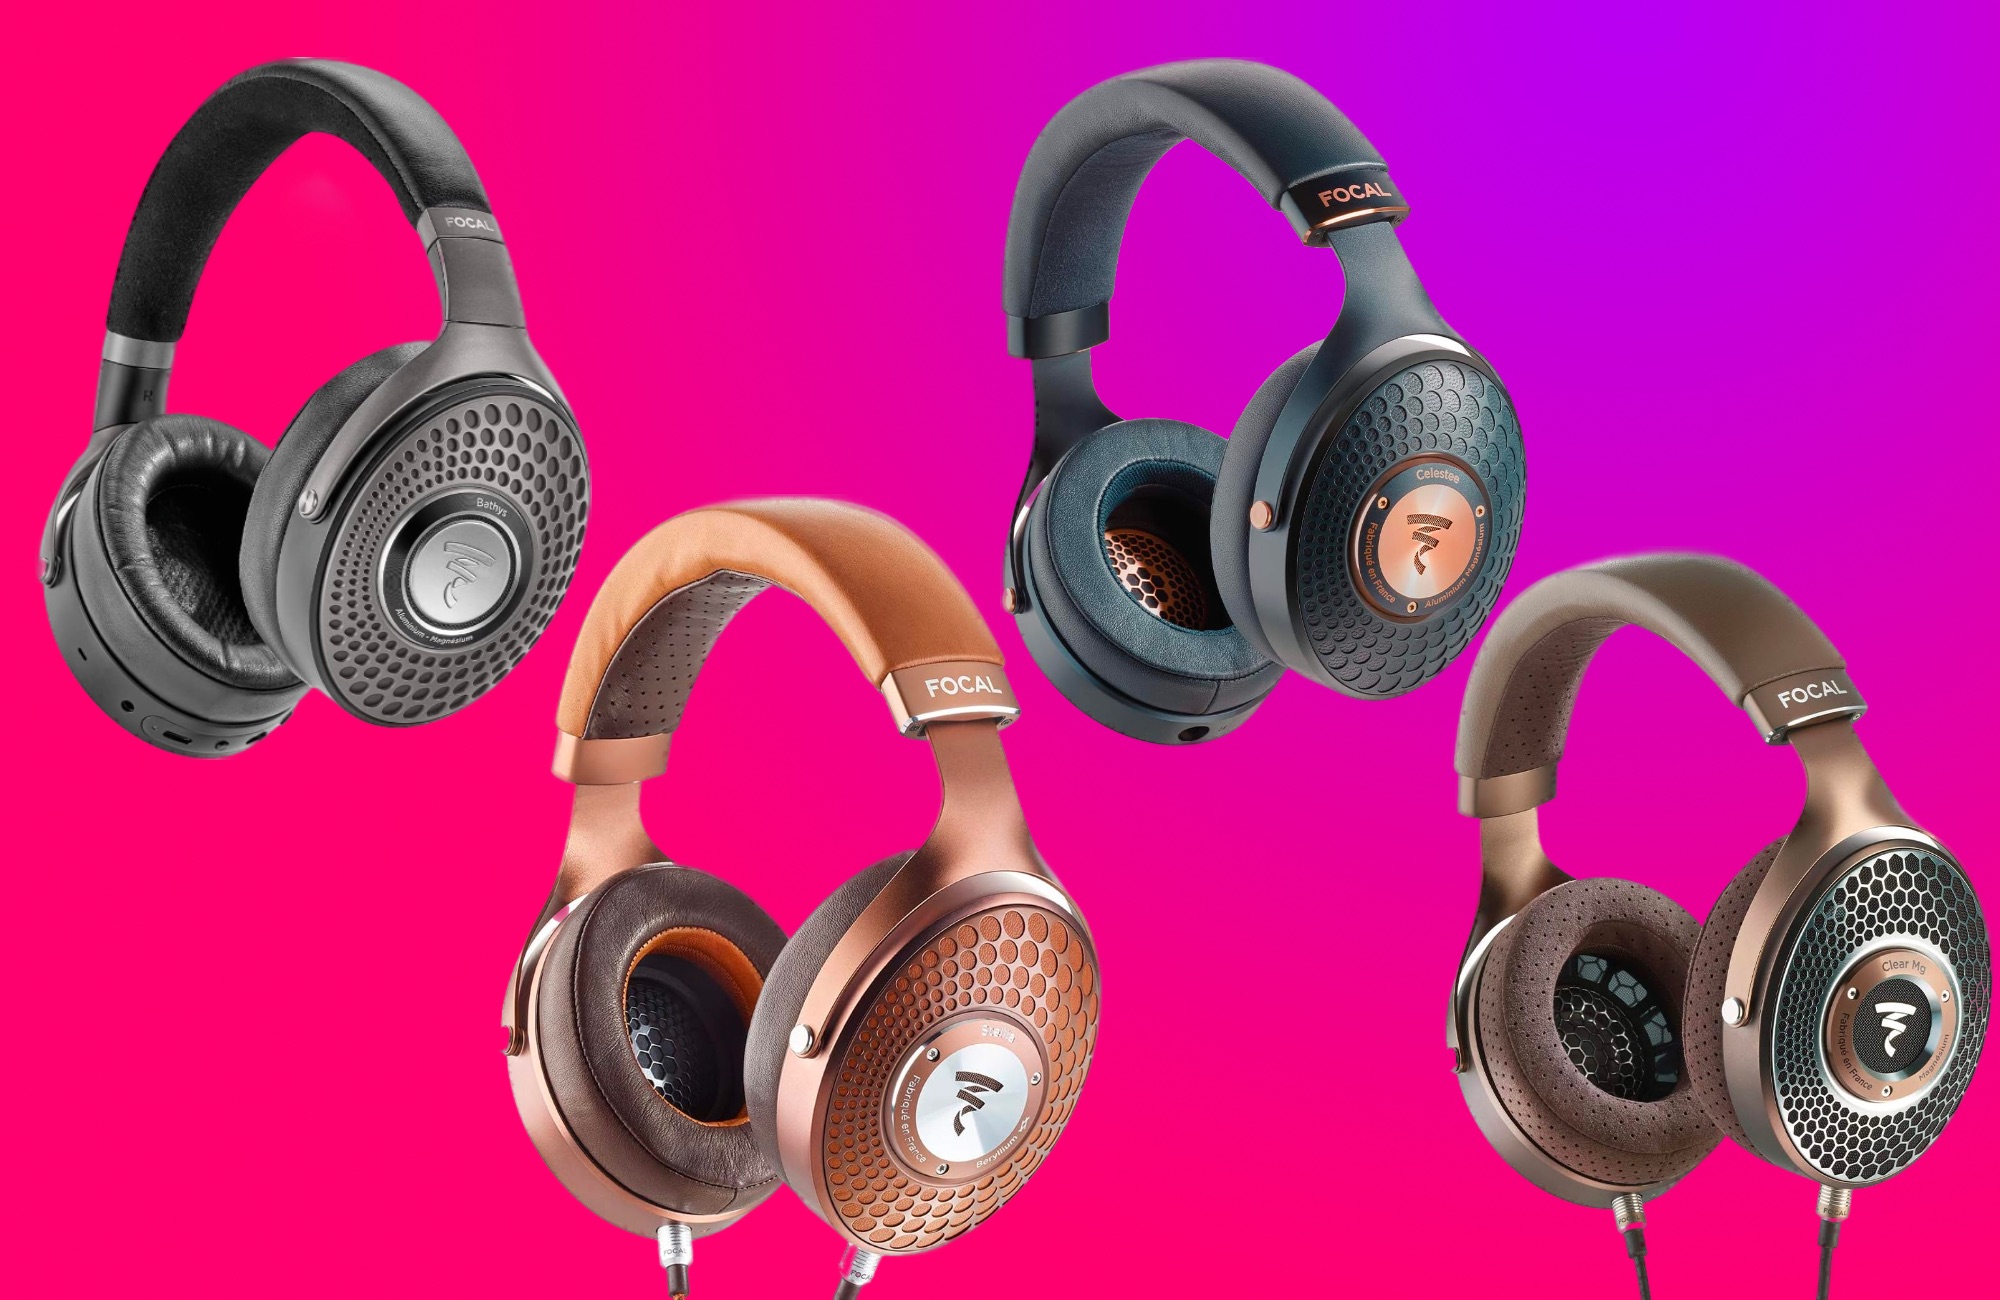 Save hundreds on Focal’s audiophile headphones at Amazon